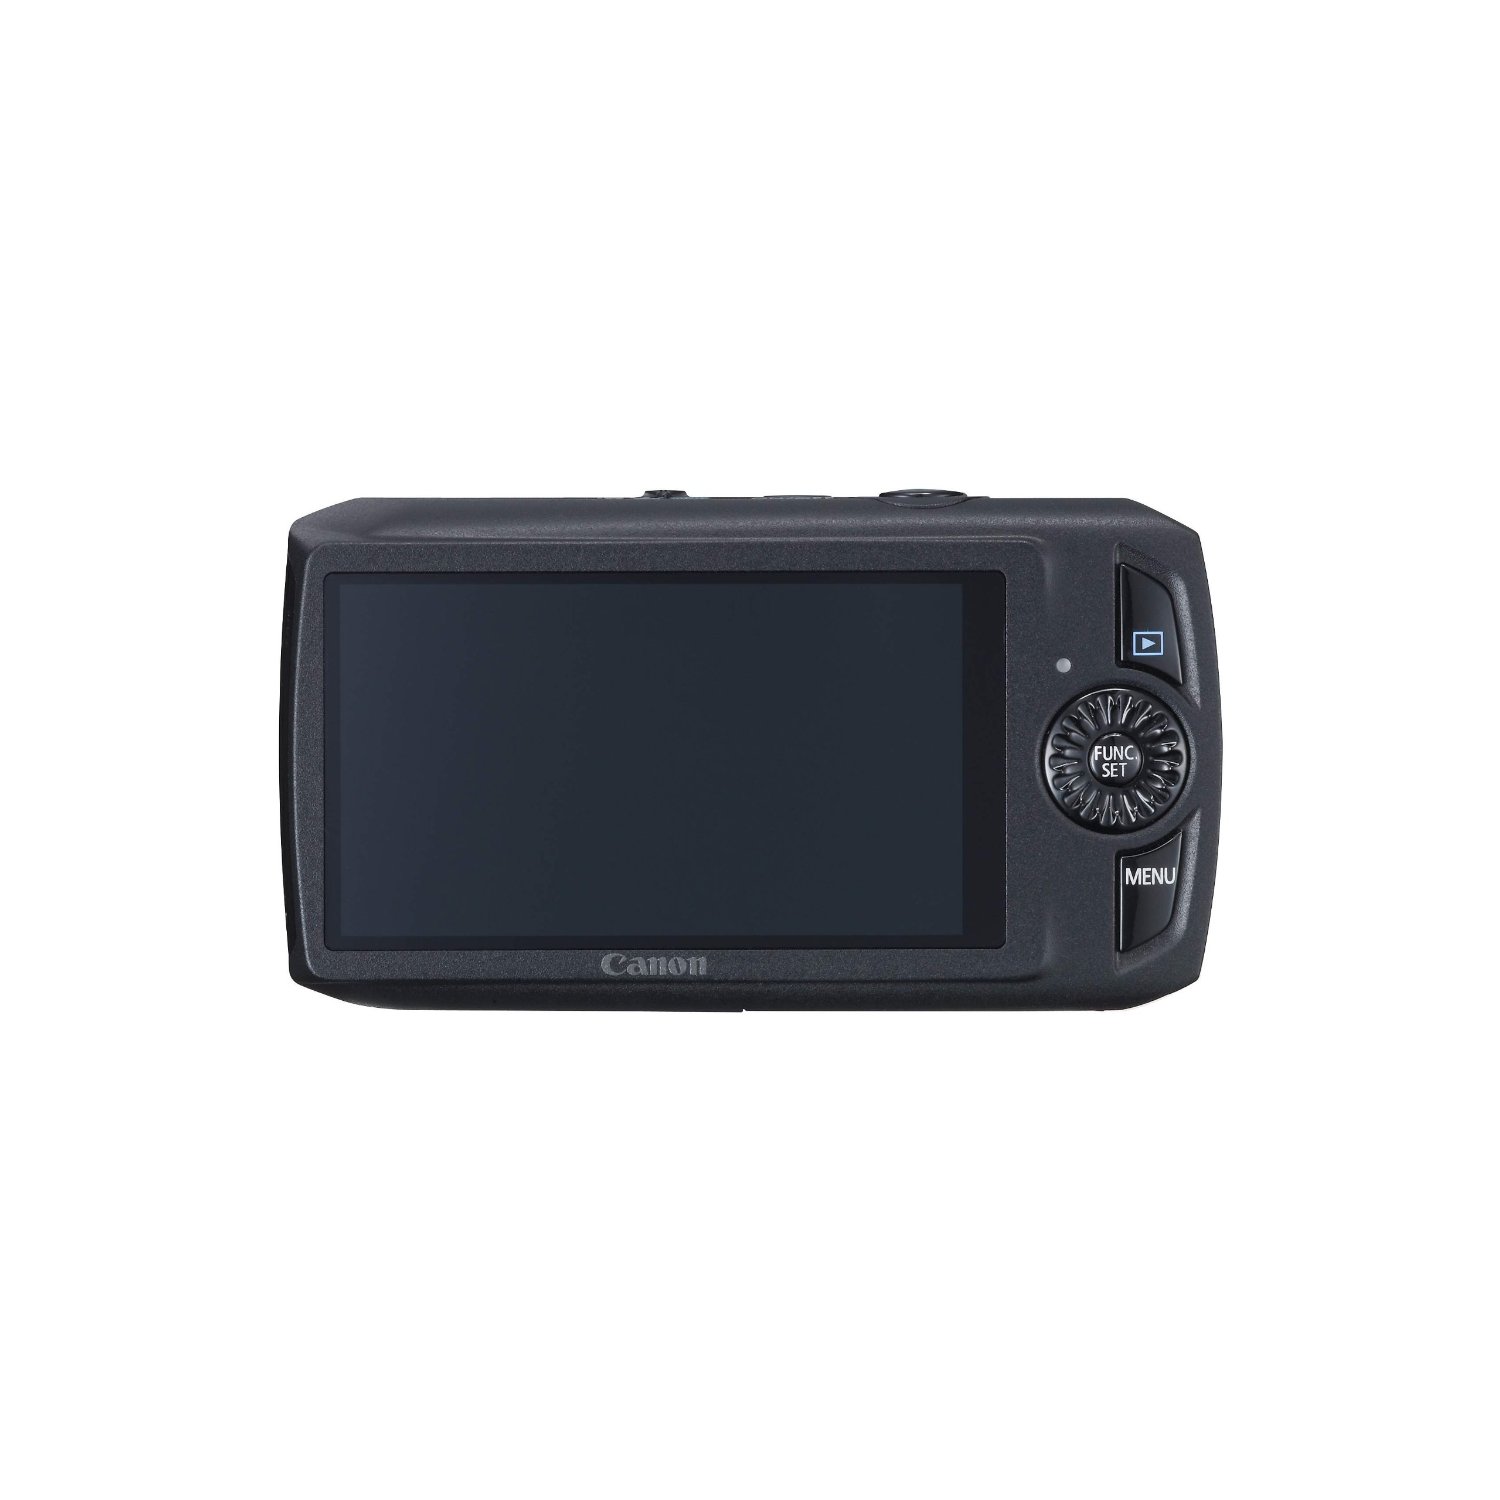 http://thetechjournal.com/wp-content/uploads/images/1109/1316083020-canon-powershot-sd4000is-10-mp-cmos-digital-camera-5.jpg